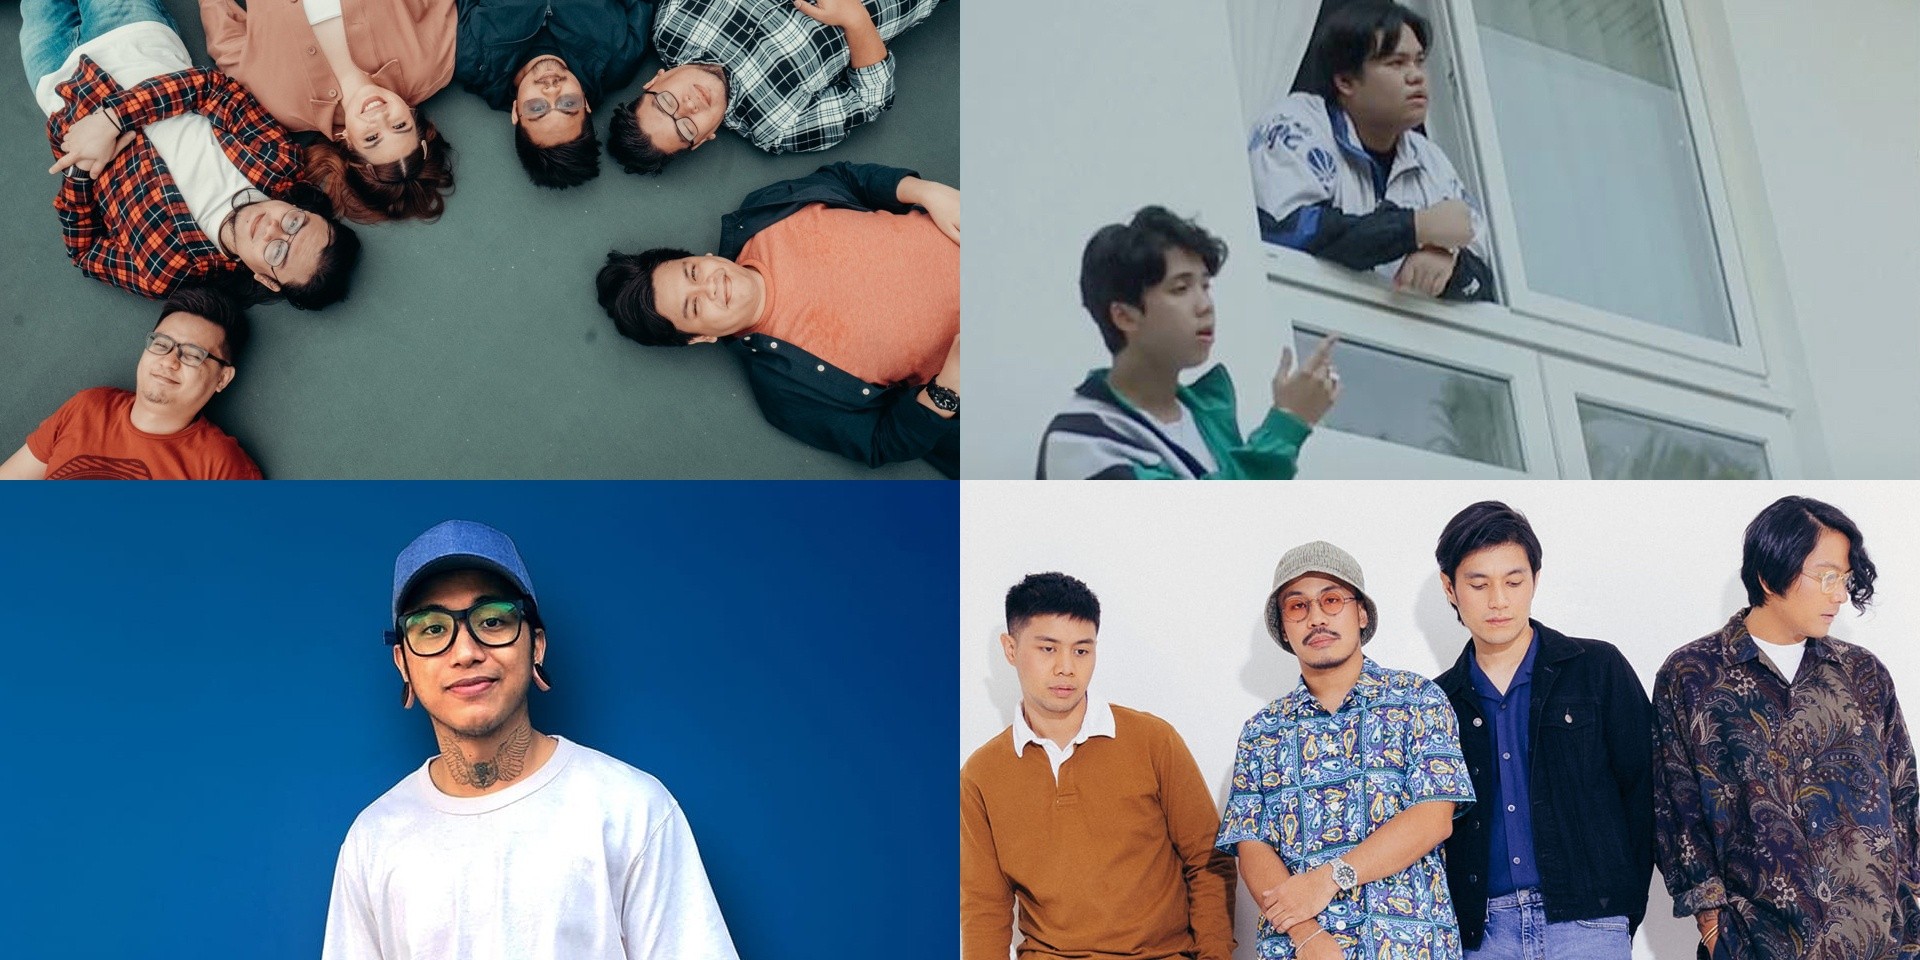 Autotelic, She's Only Sixteen, firegod, dred., and more release new music – listen